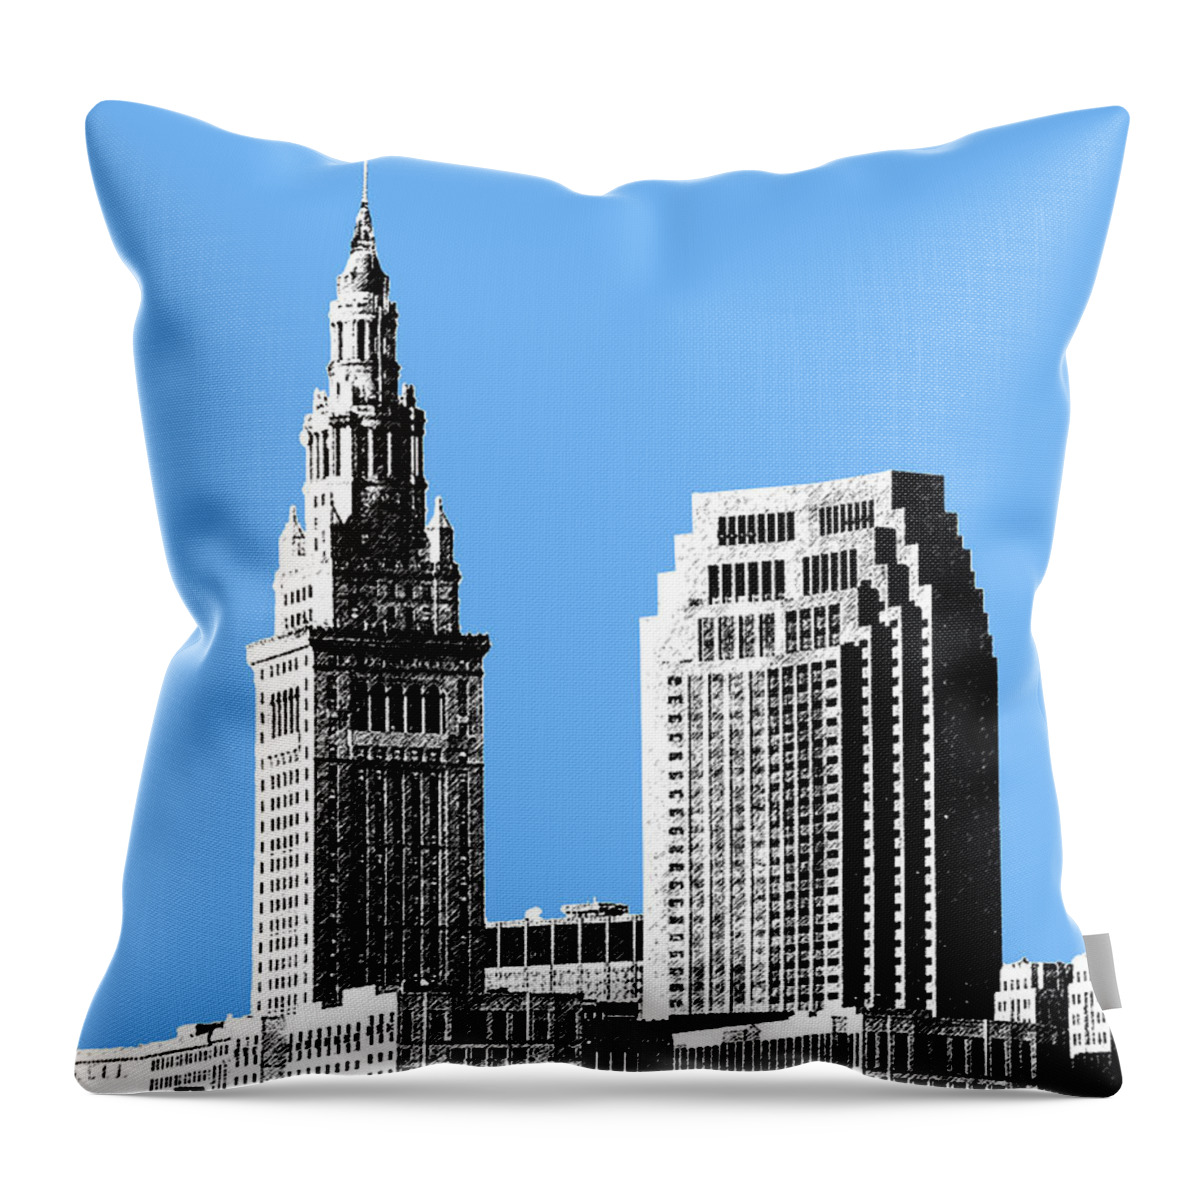 Architecture Throw Pillow featuring the digital art Cleveland Skyline 1 - Light Blue by DB Artist